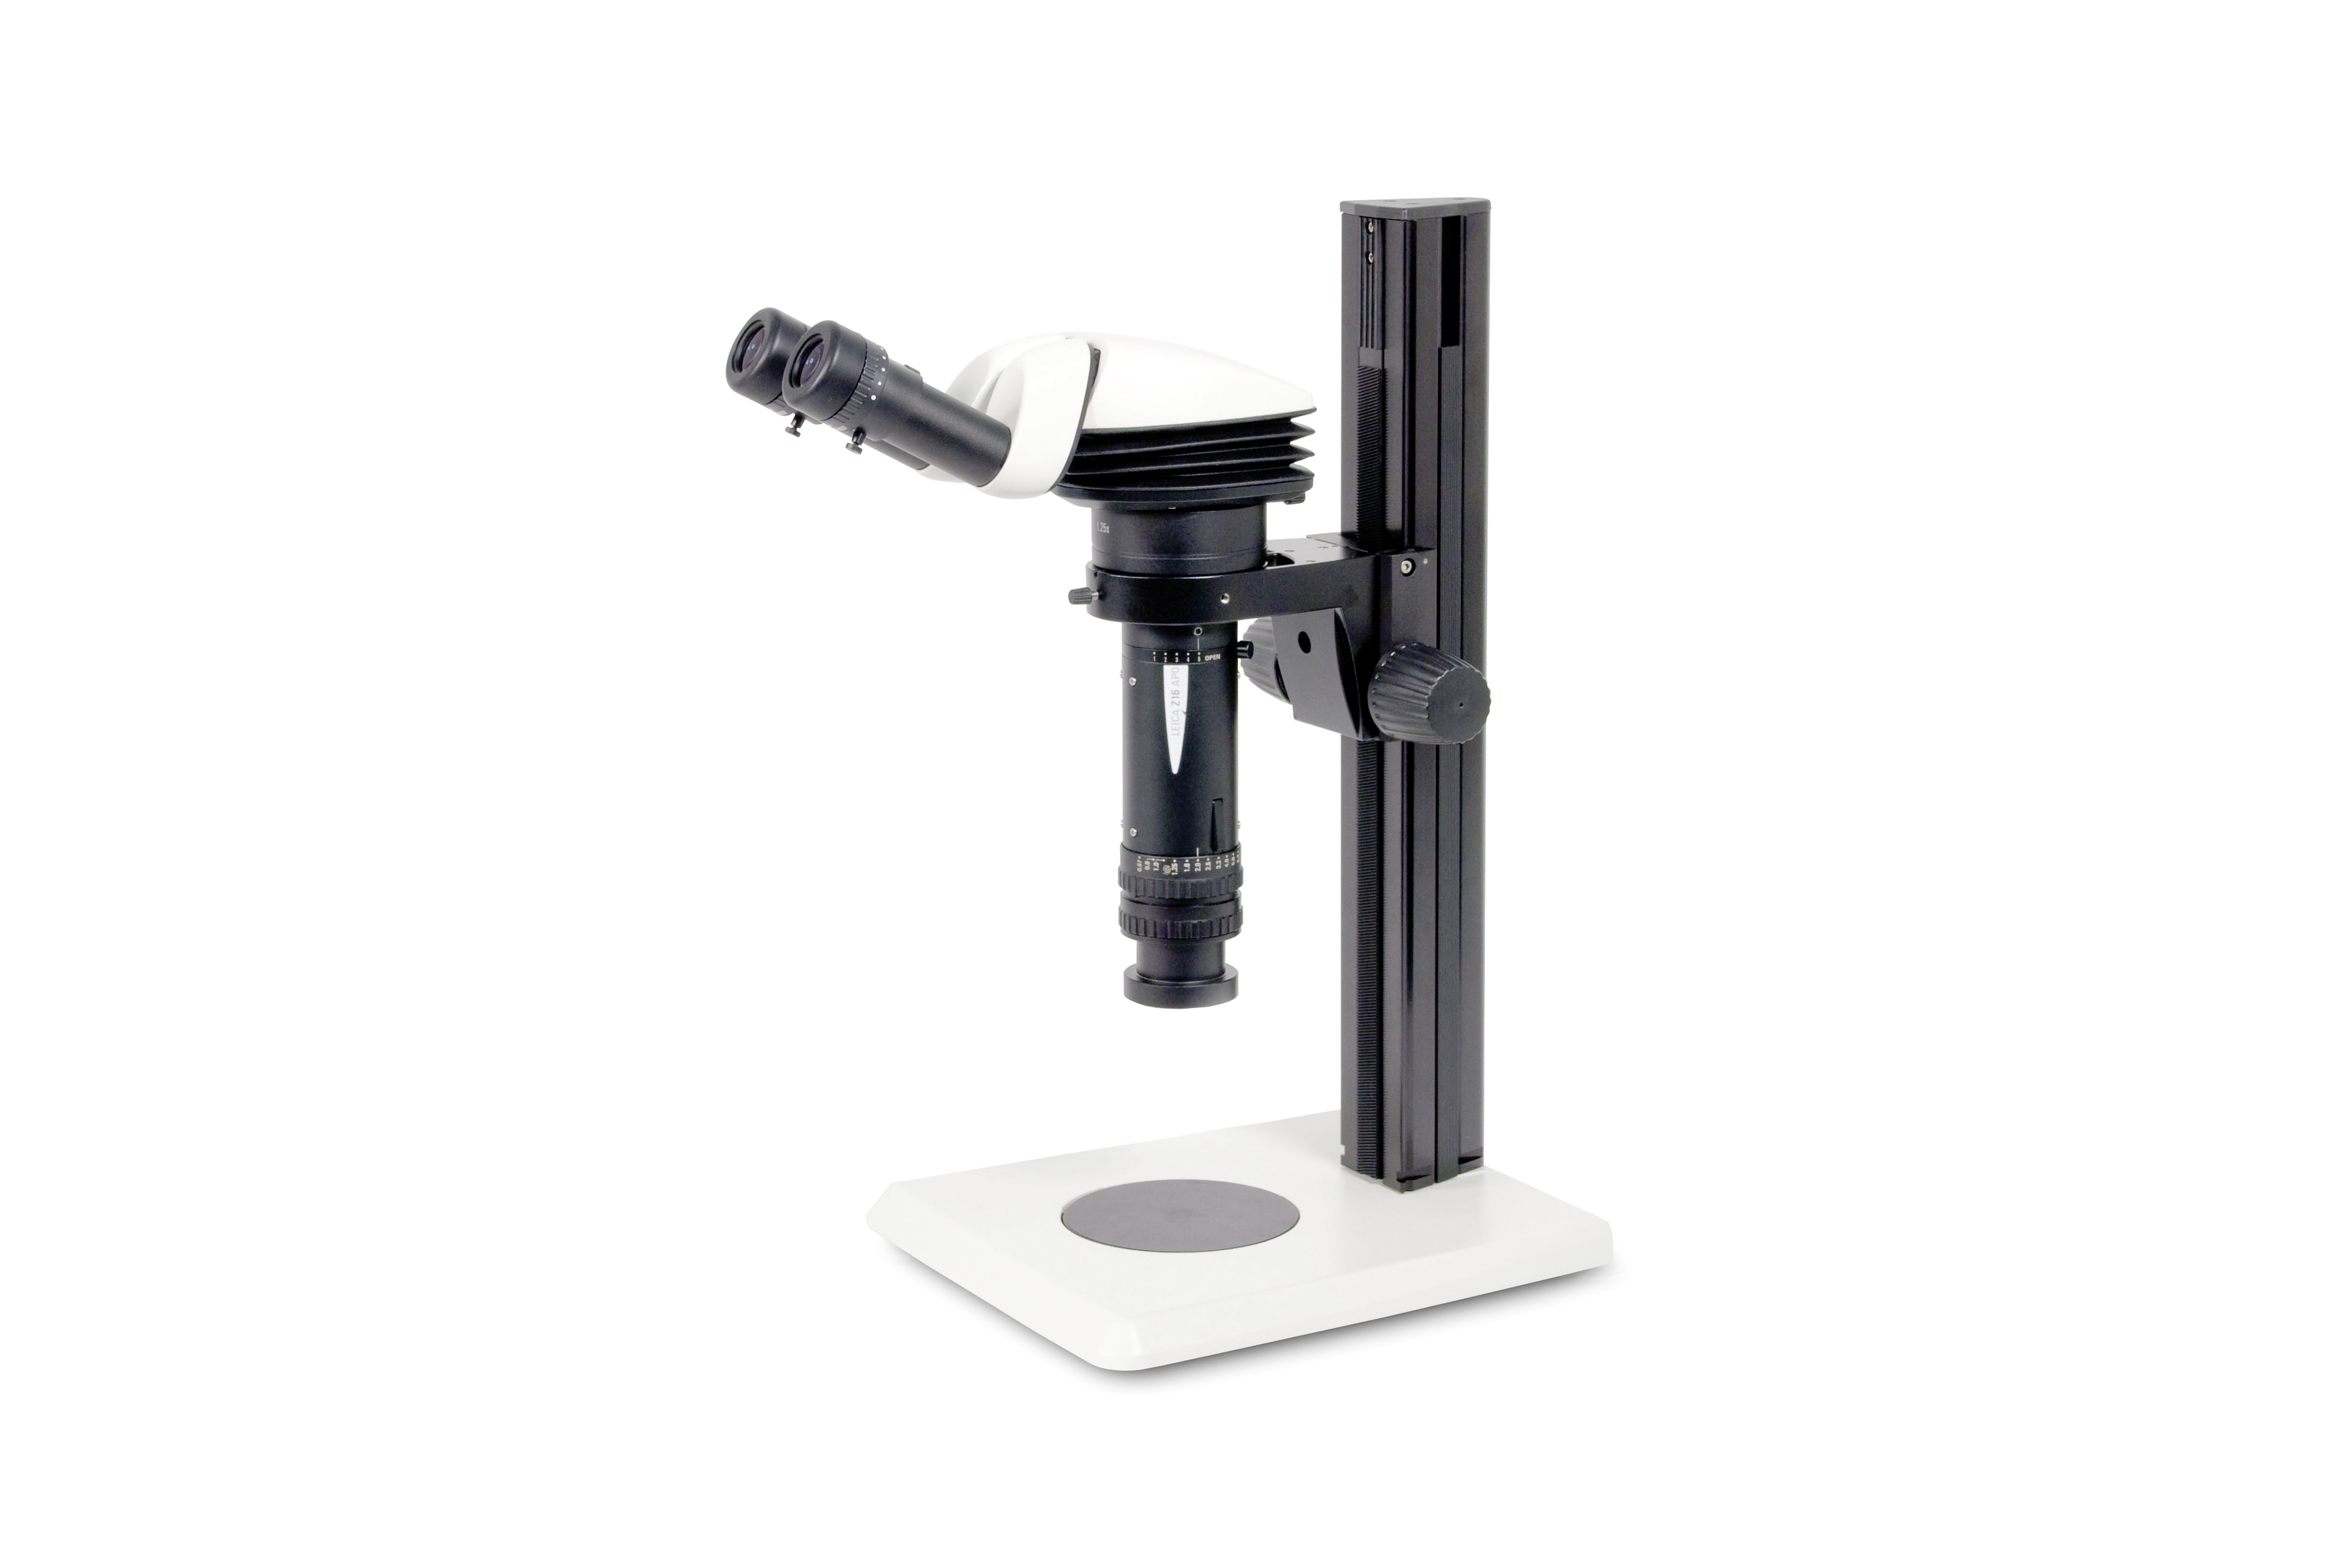 Large working distance allows convenient analysis of any sample.